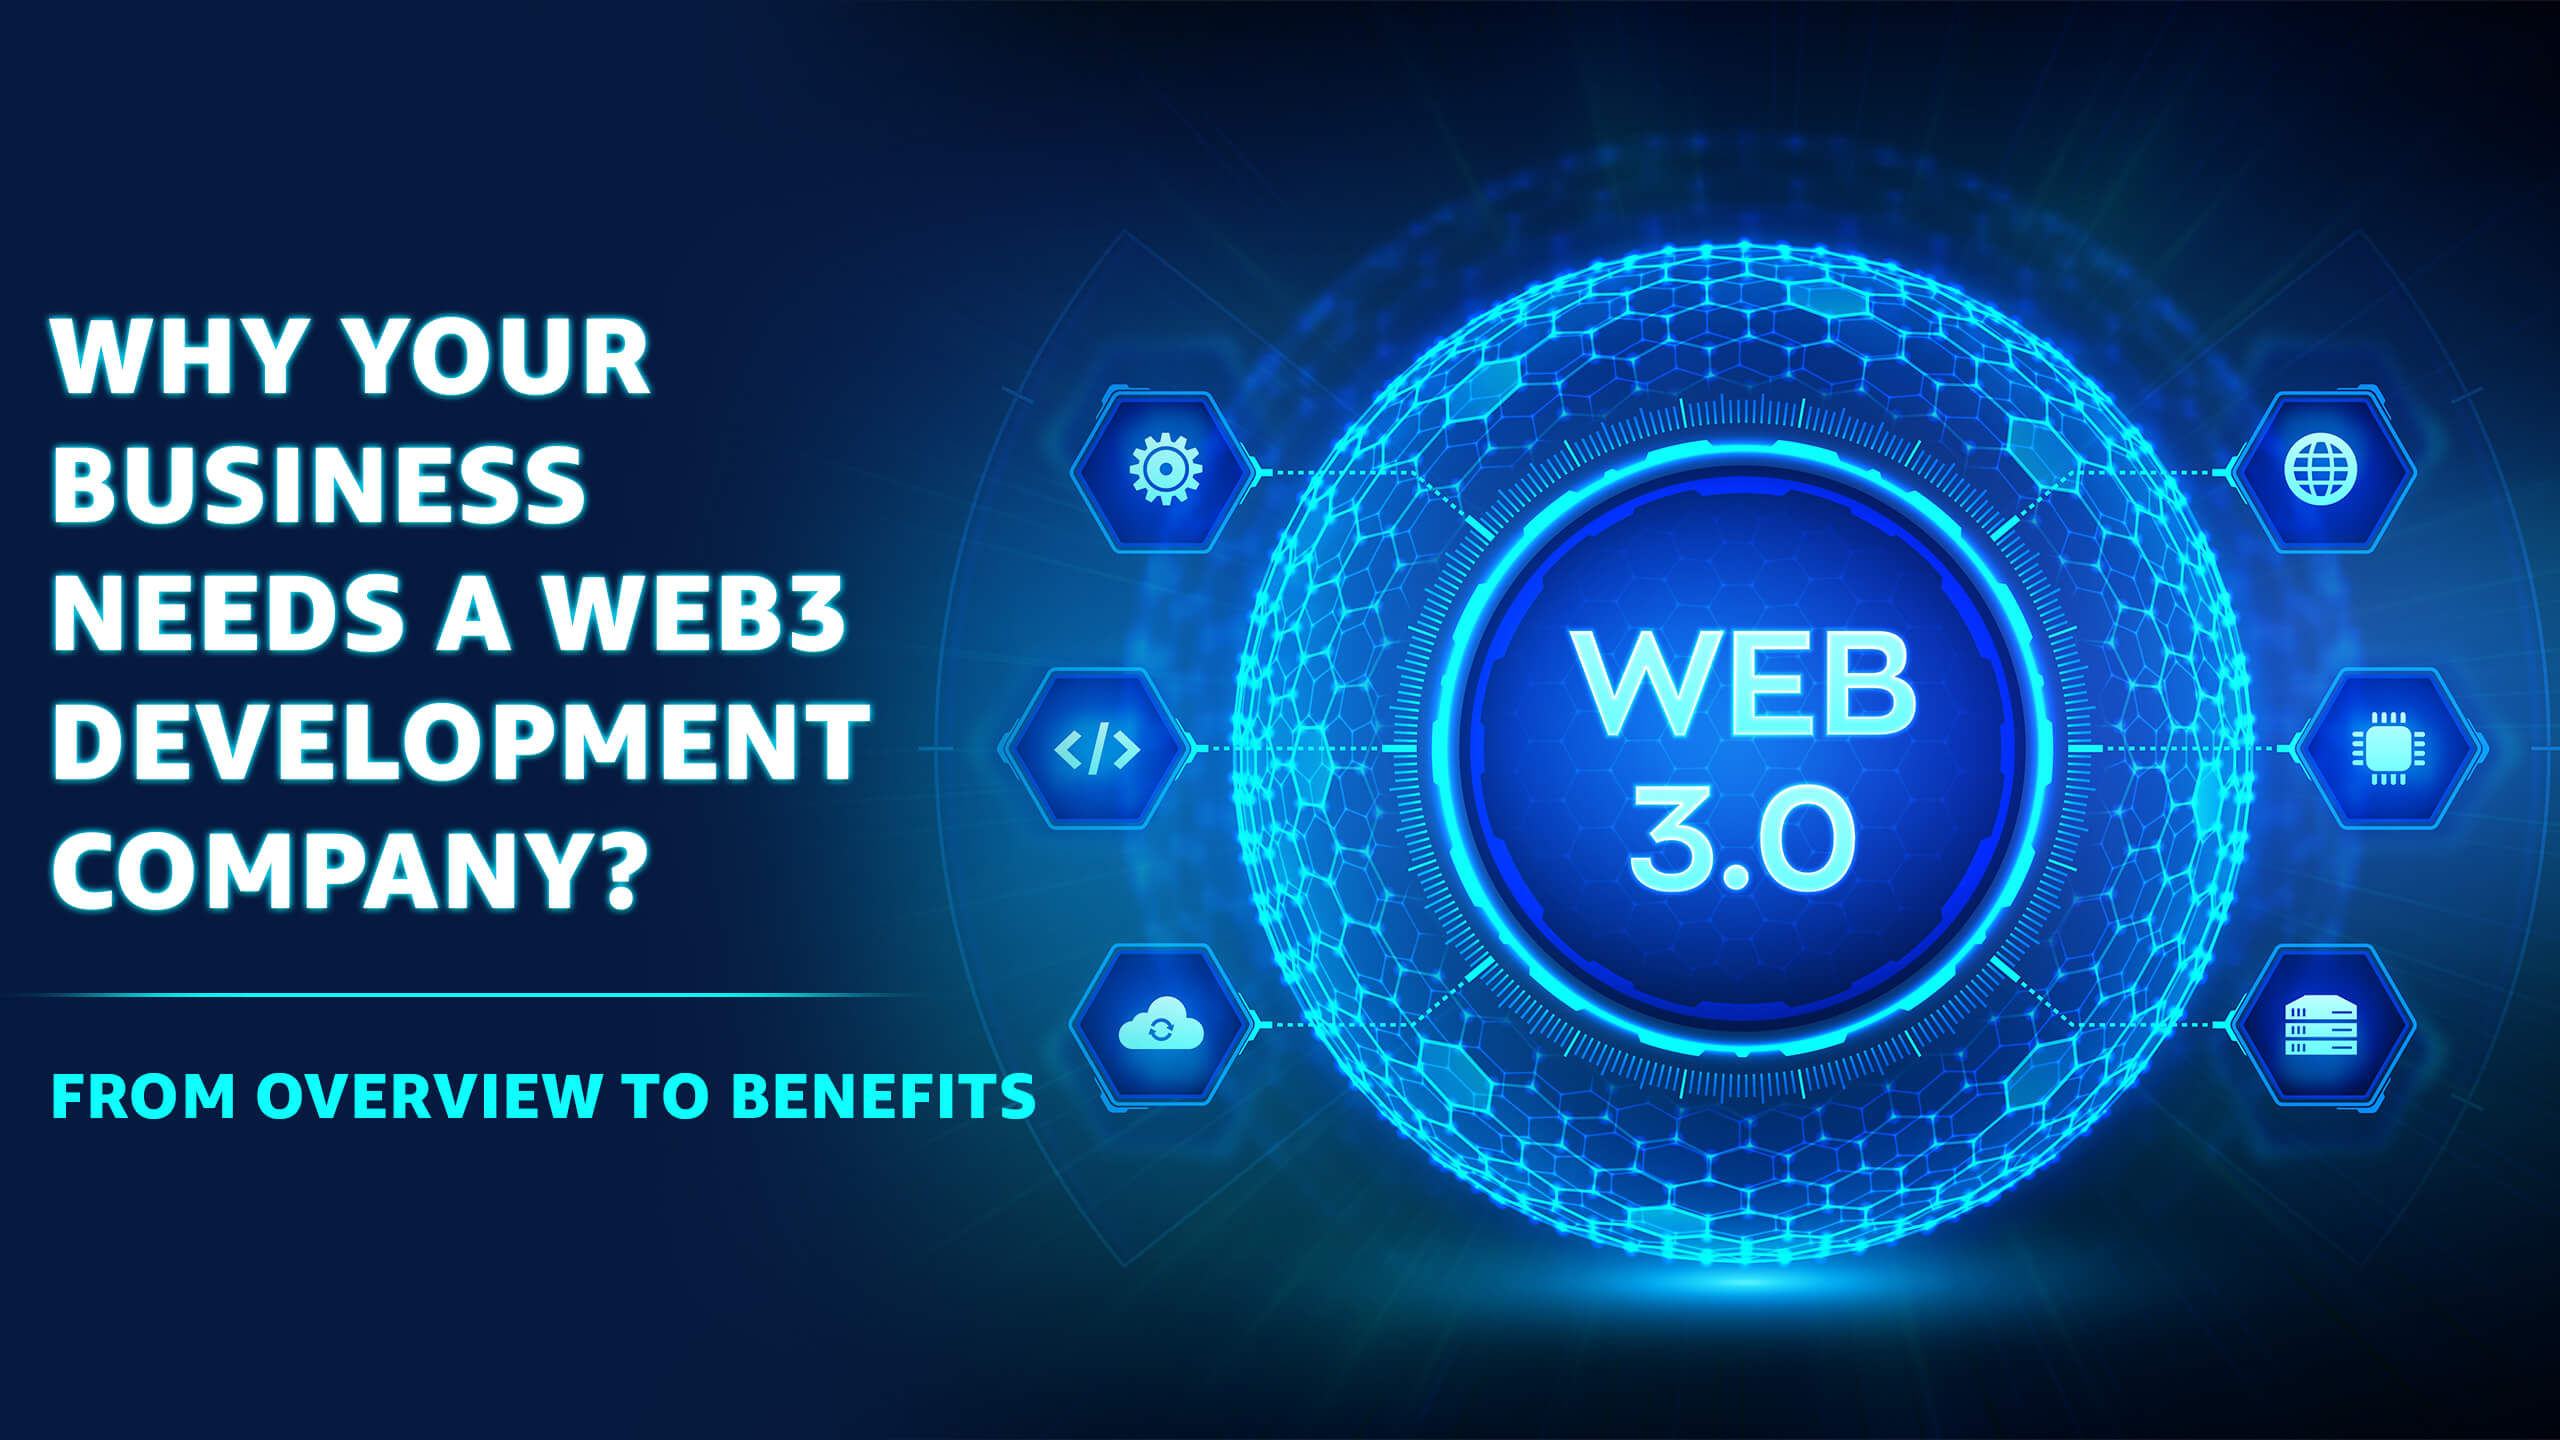 Why Your Business Needs a Web3 Development Company